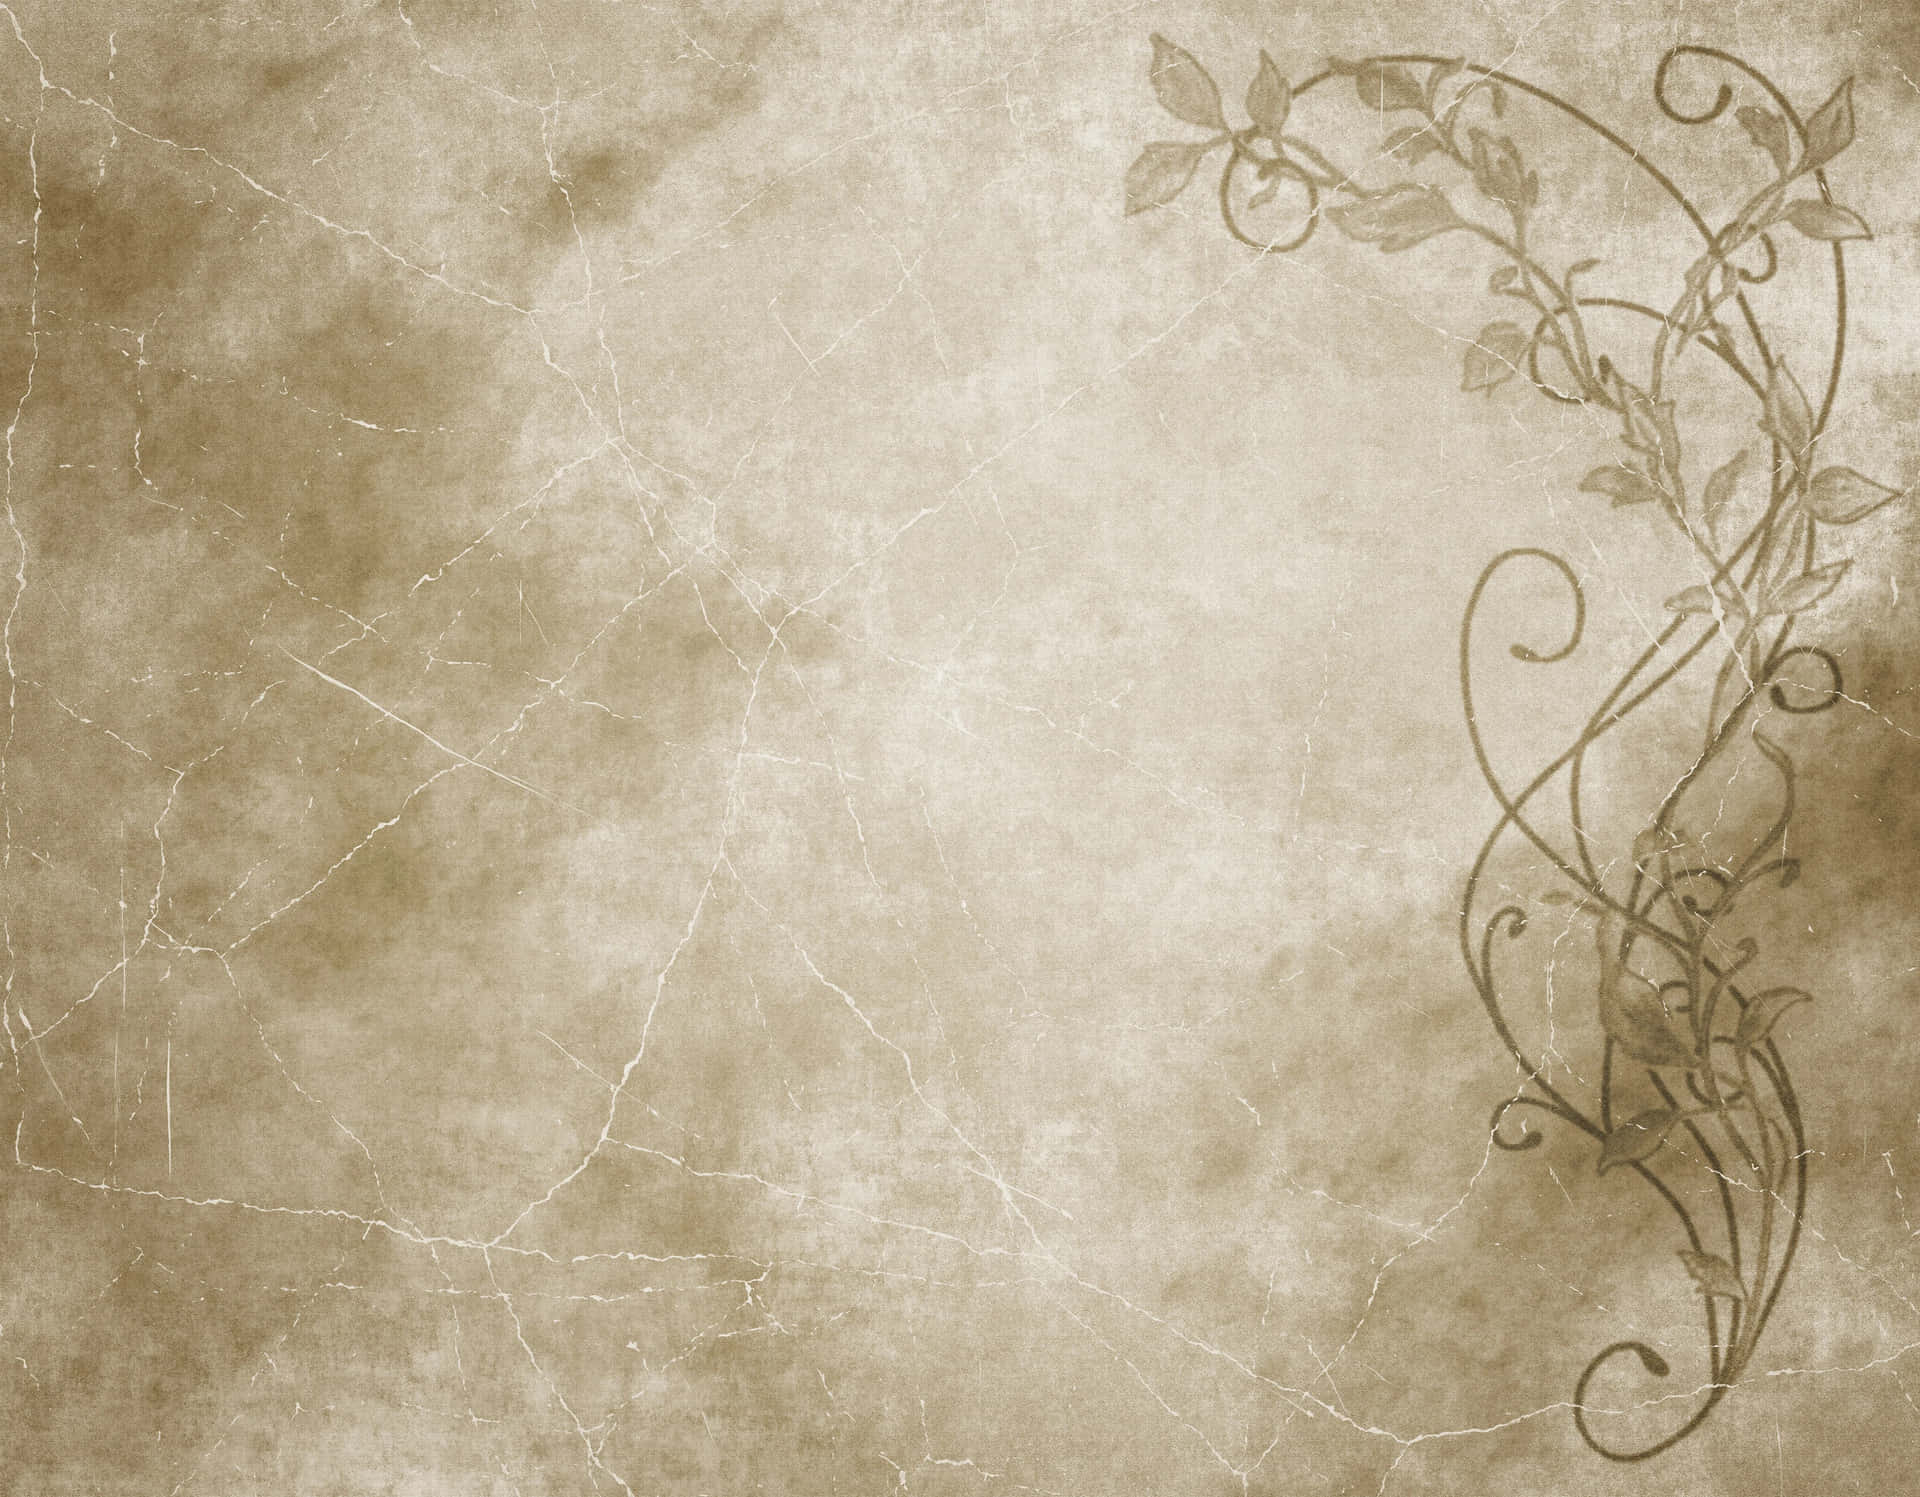 an old fashioned background with a floral design